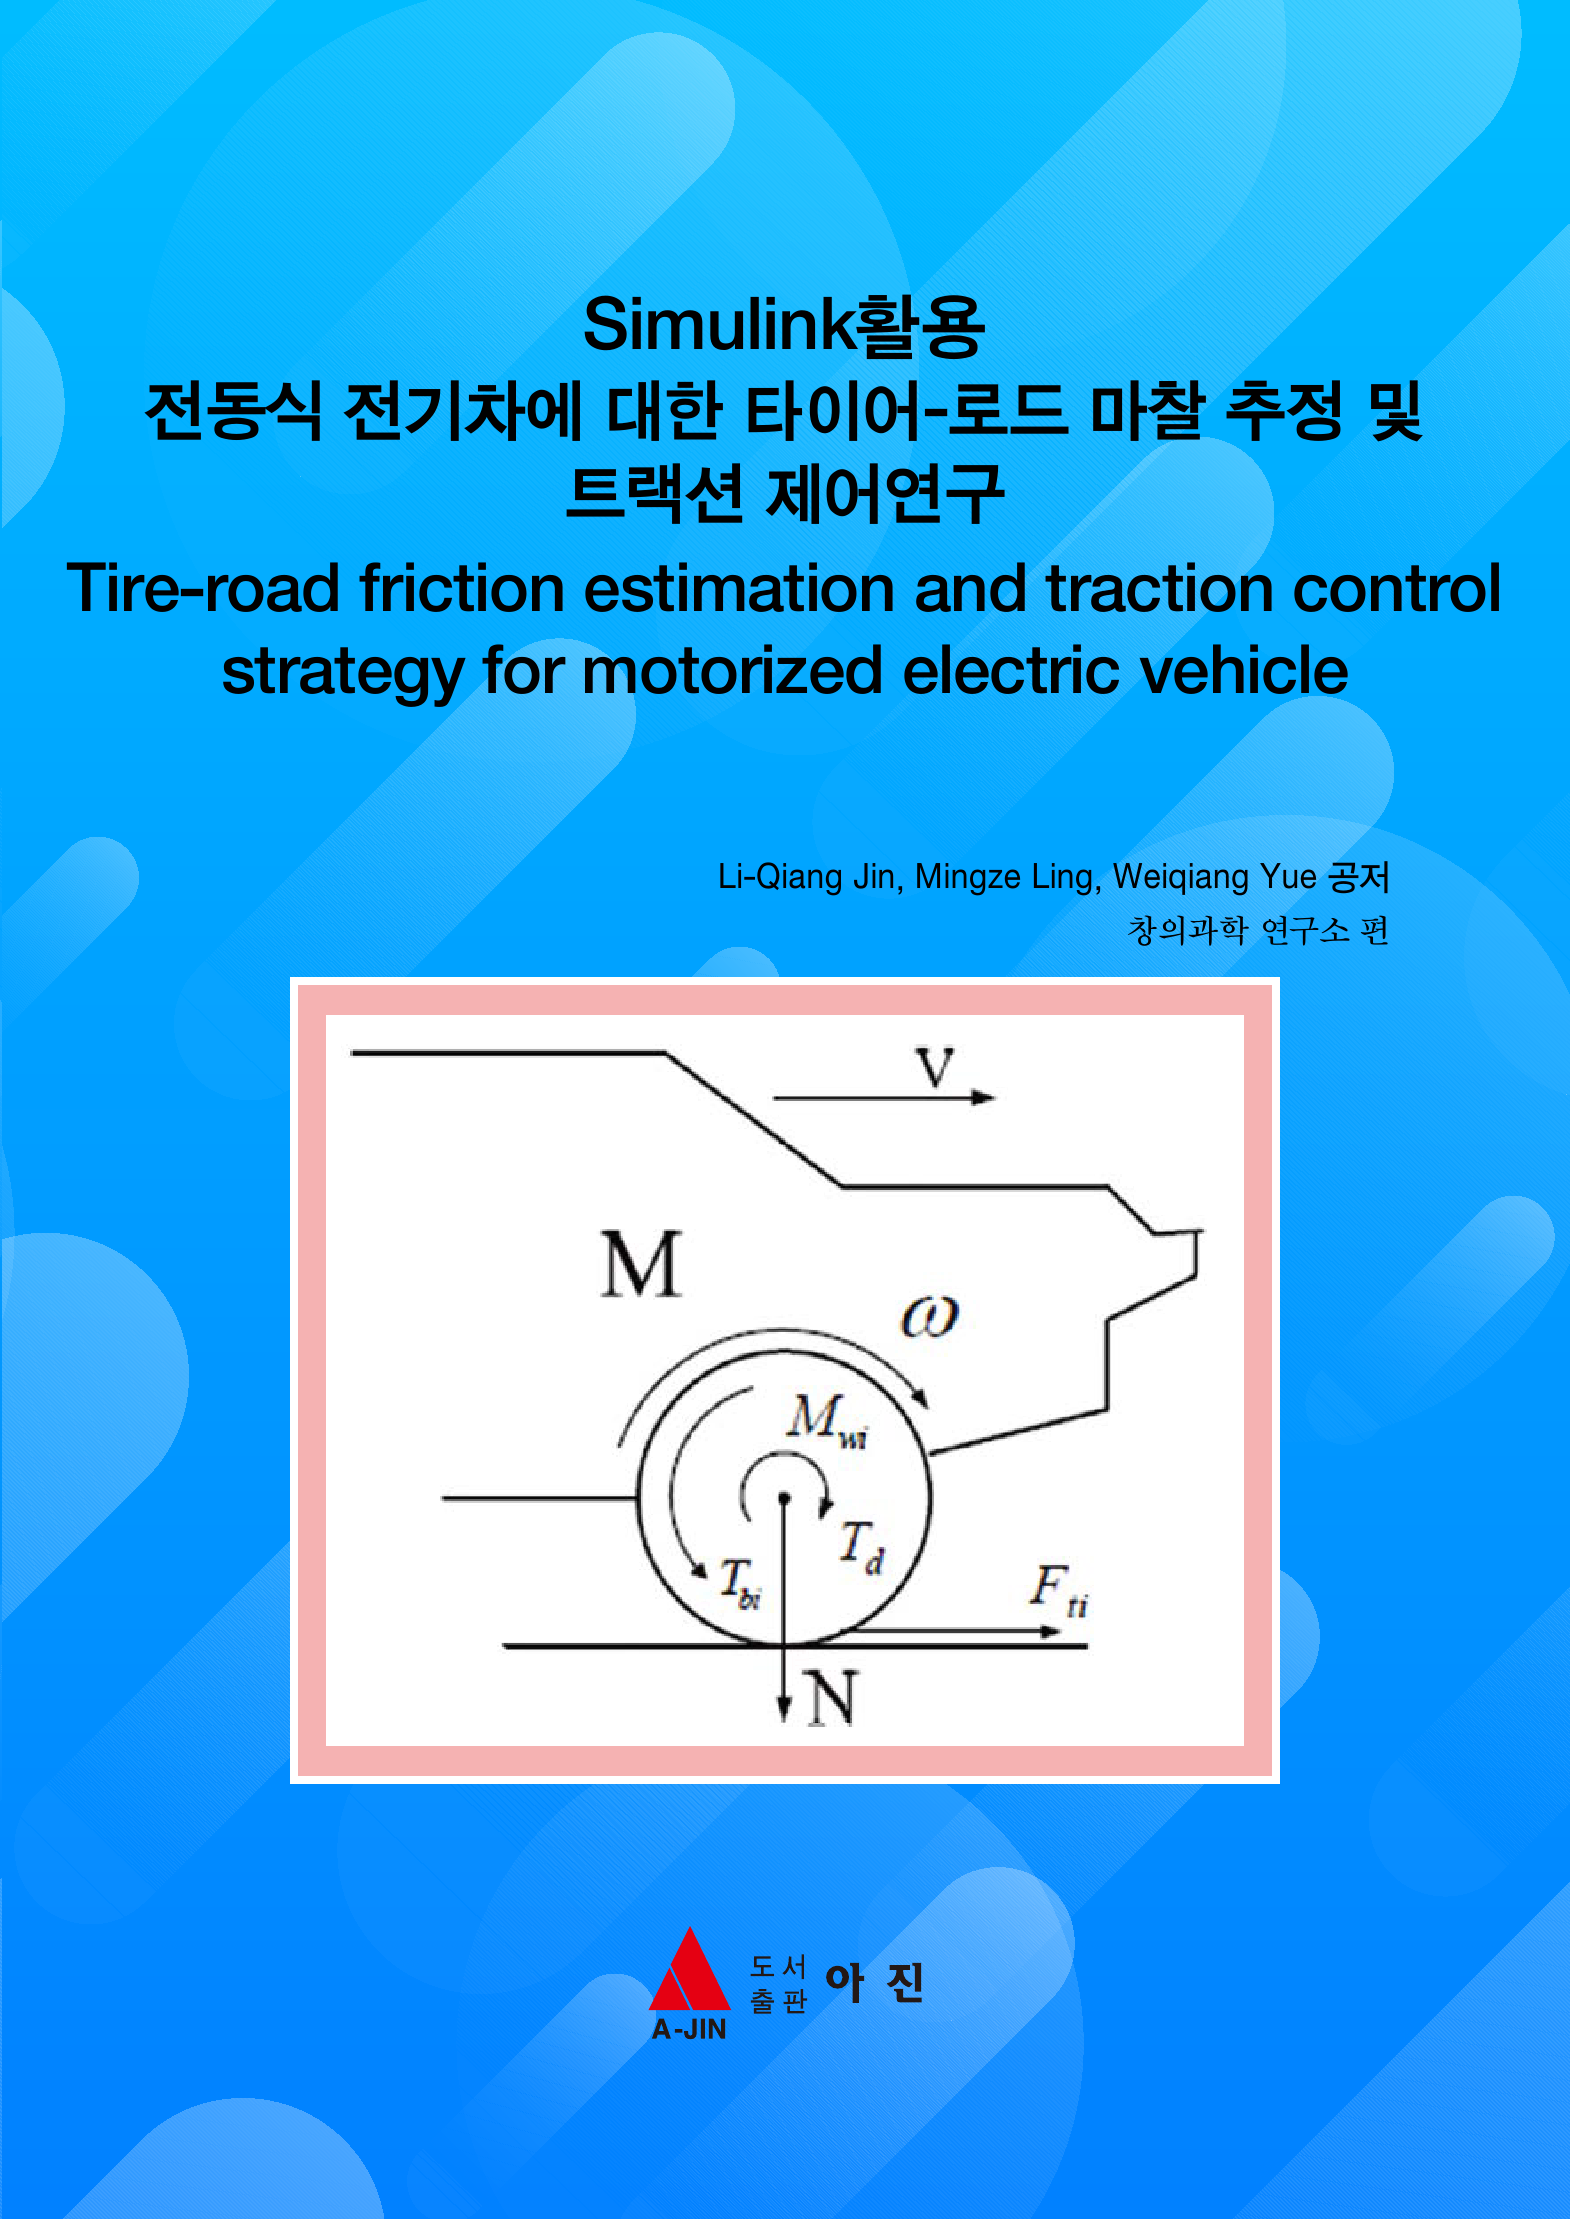 Simulink활용 전동식 전기차에 대한 타이어-로드 마찰 추정 및 트랙션 제어연구(Tire-road friction estimation and traction control strategy for motorized electric vehicle)